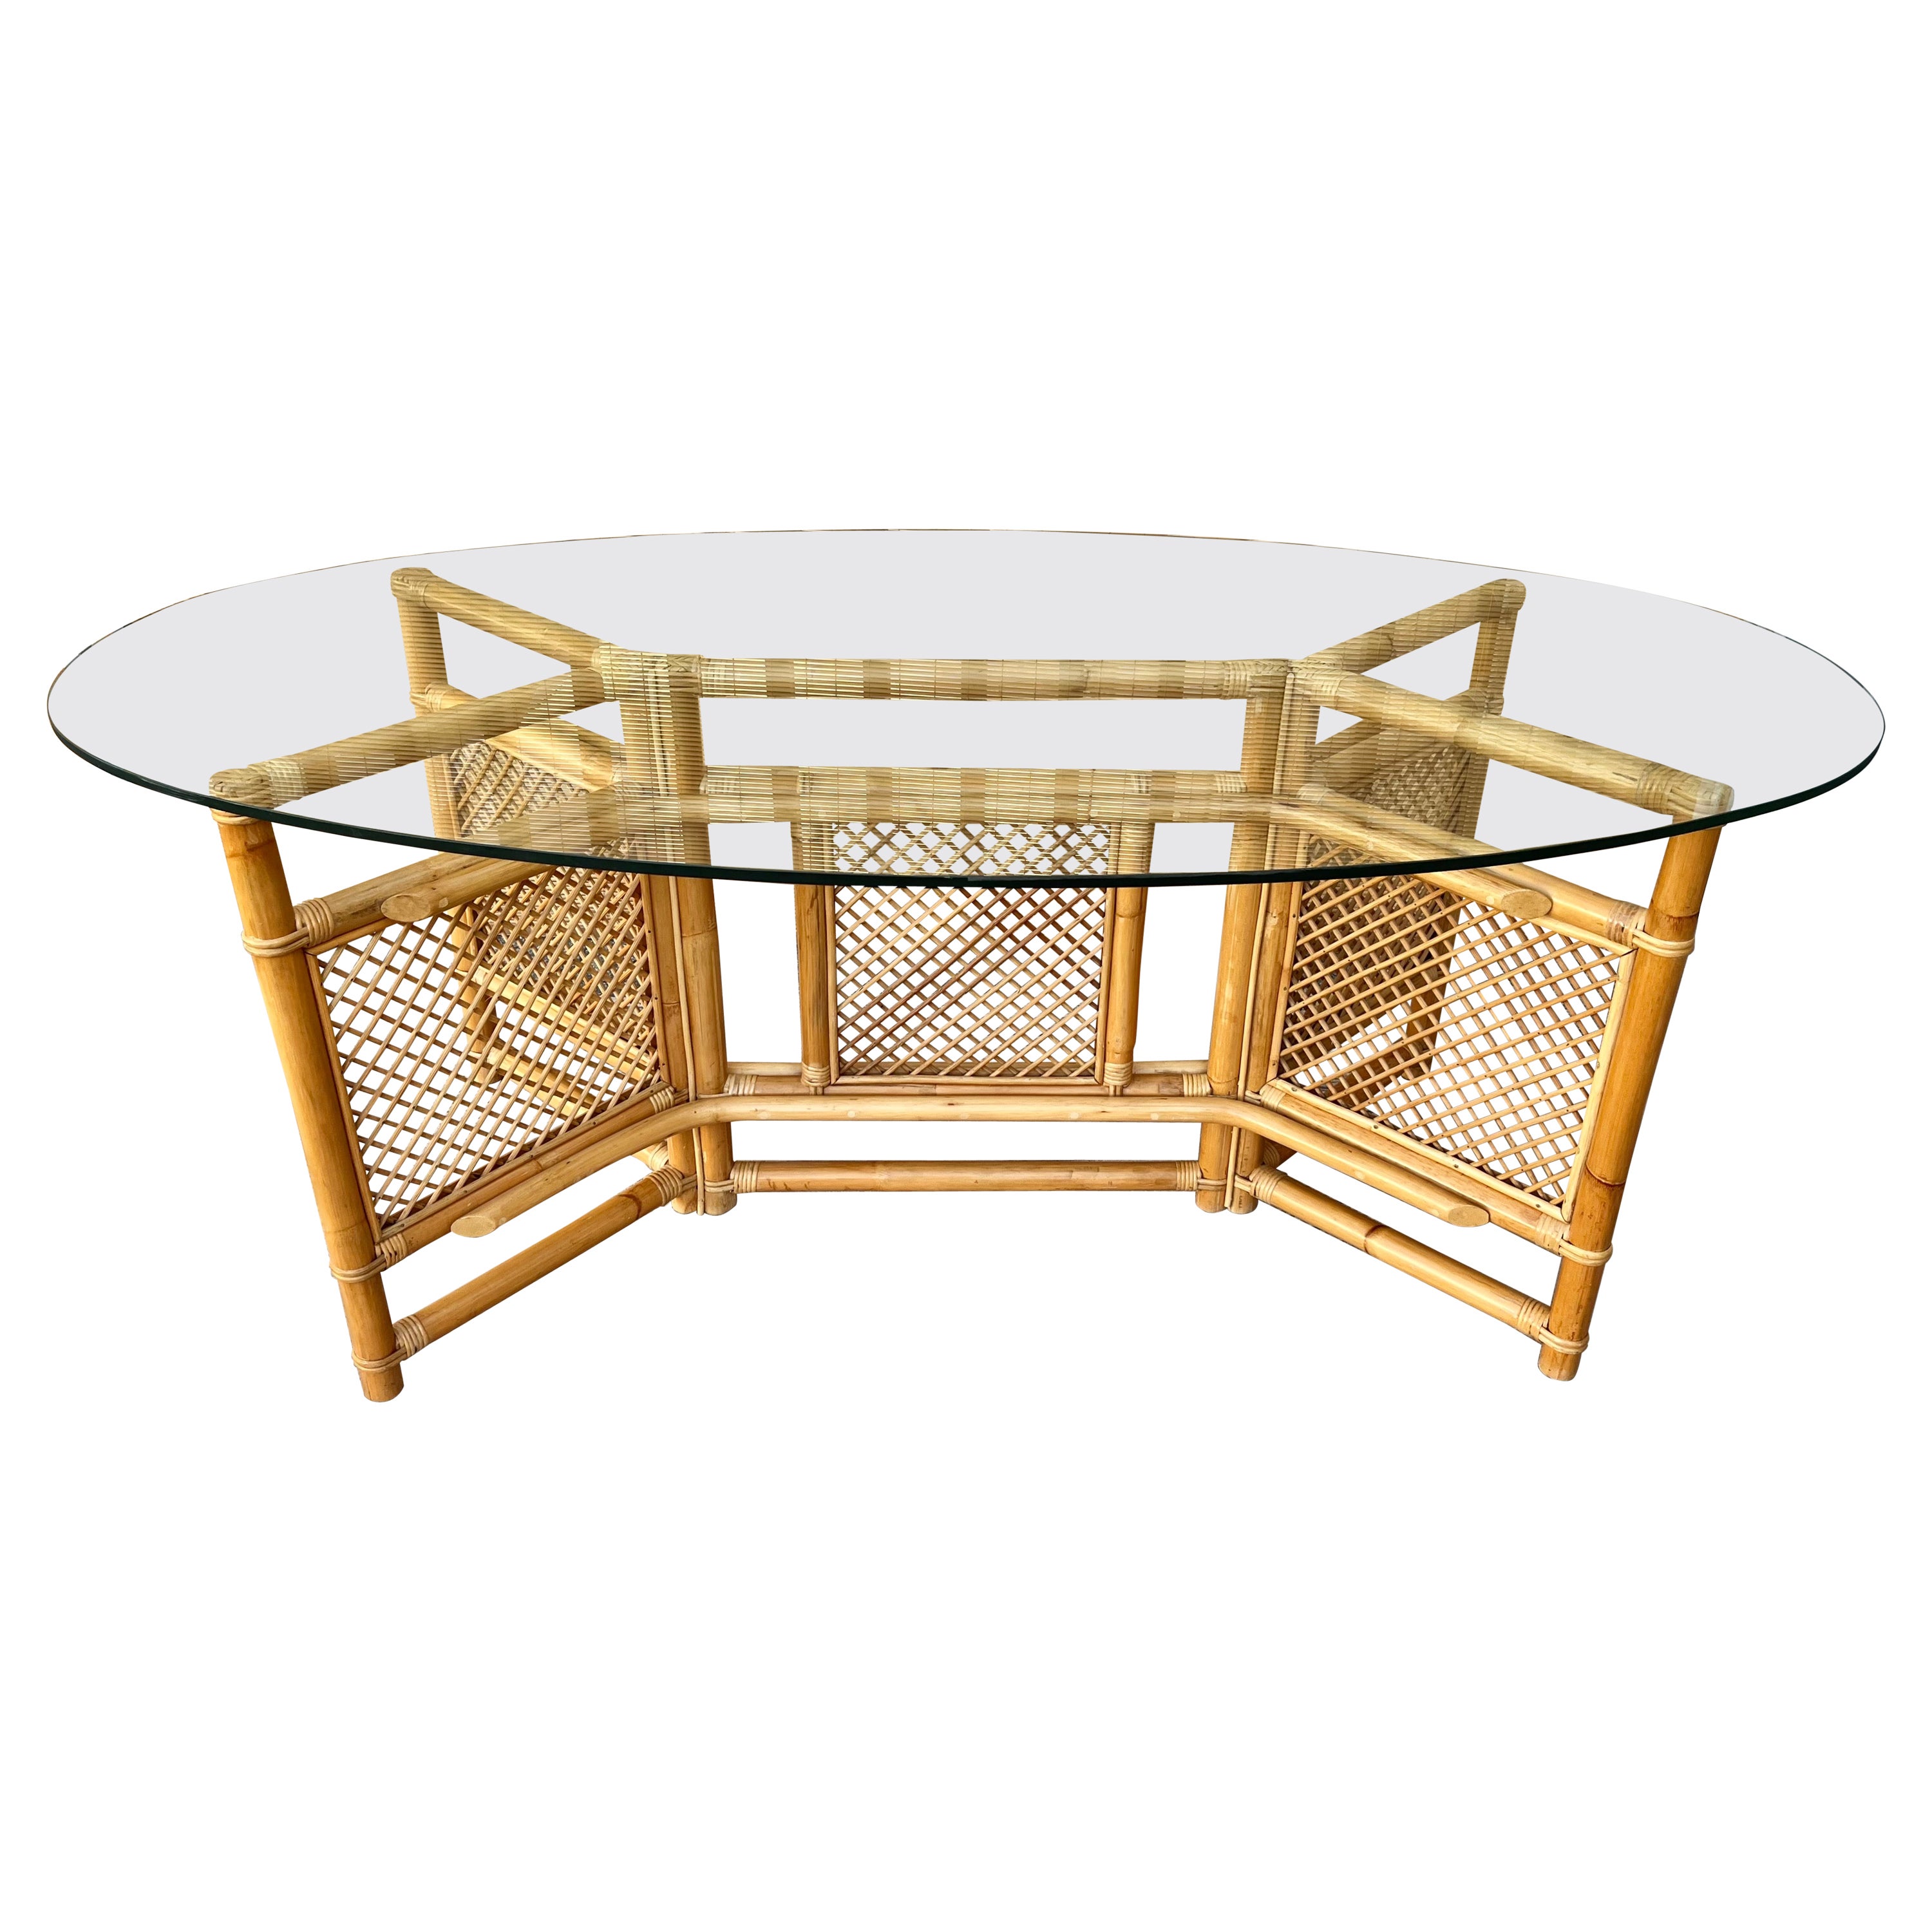 1980s Coastal Style Glass Top Rattan Dining Table in the Ficks Reed's Manner